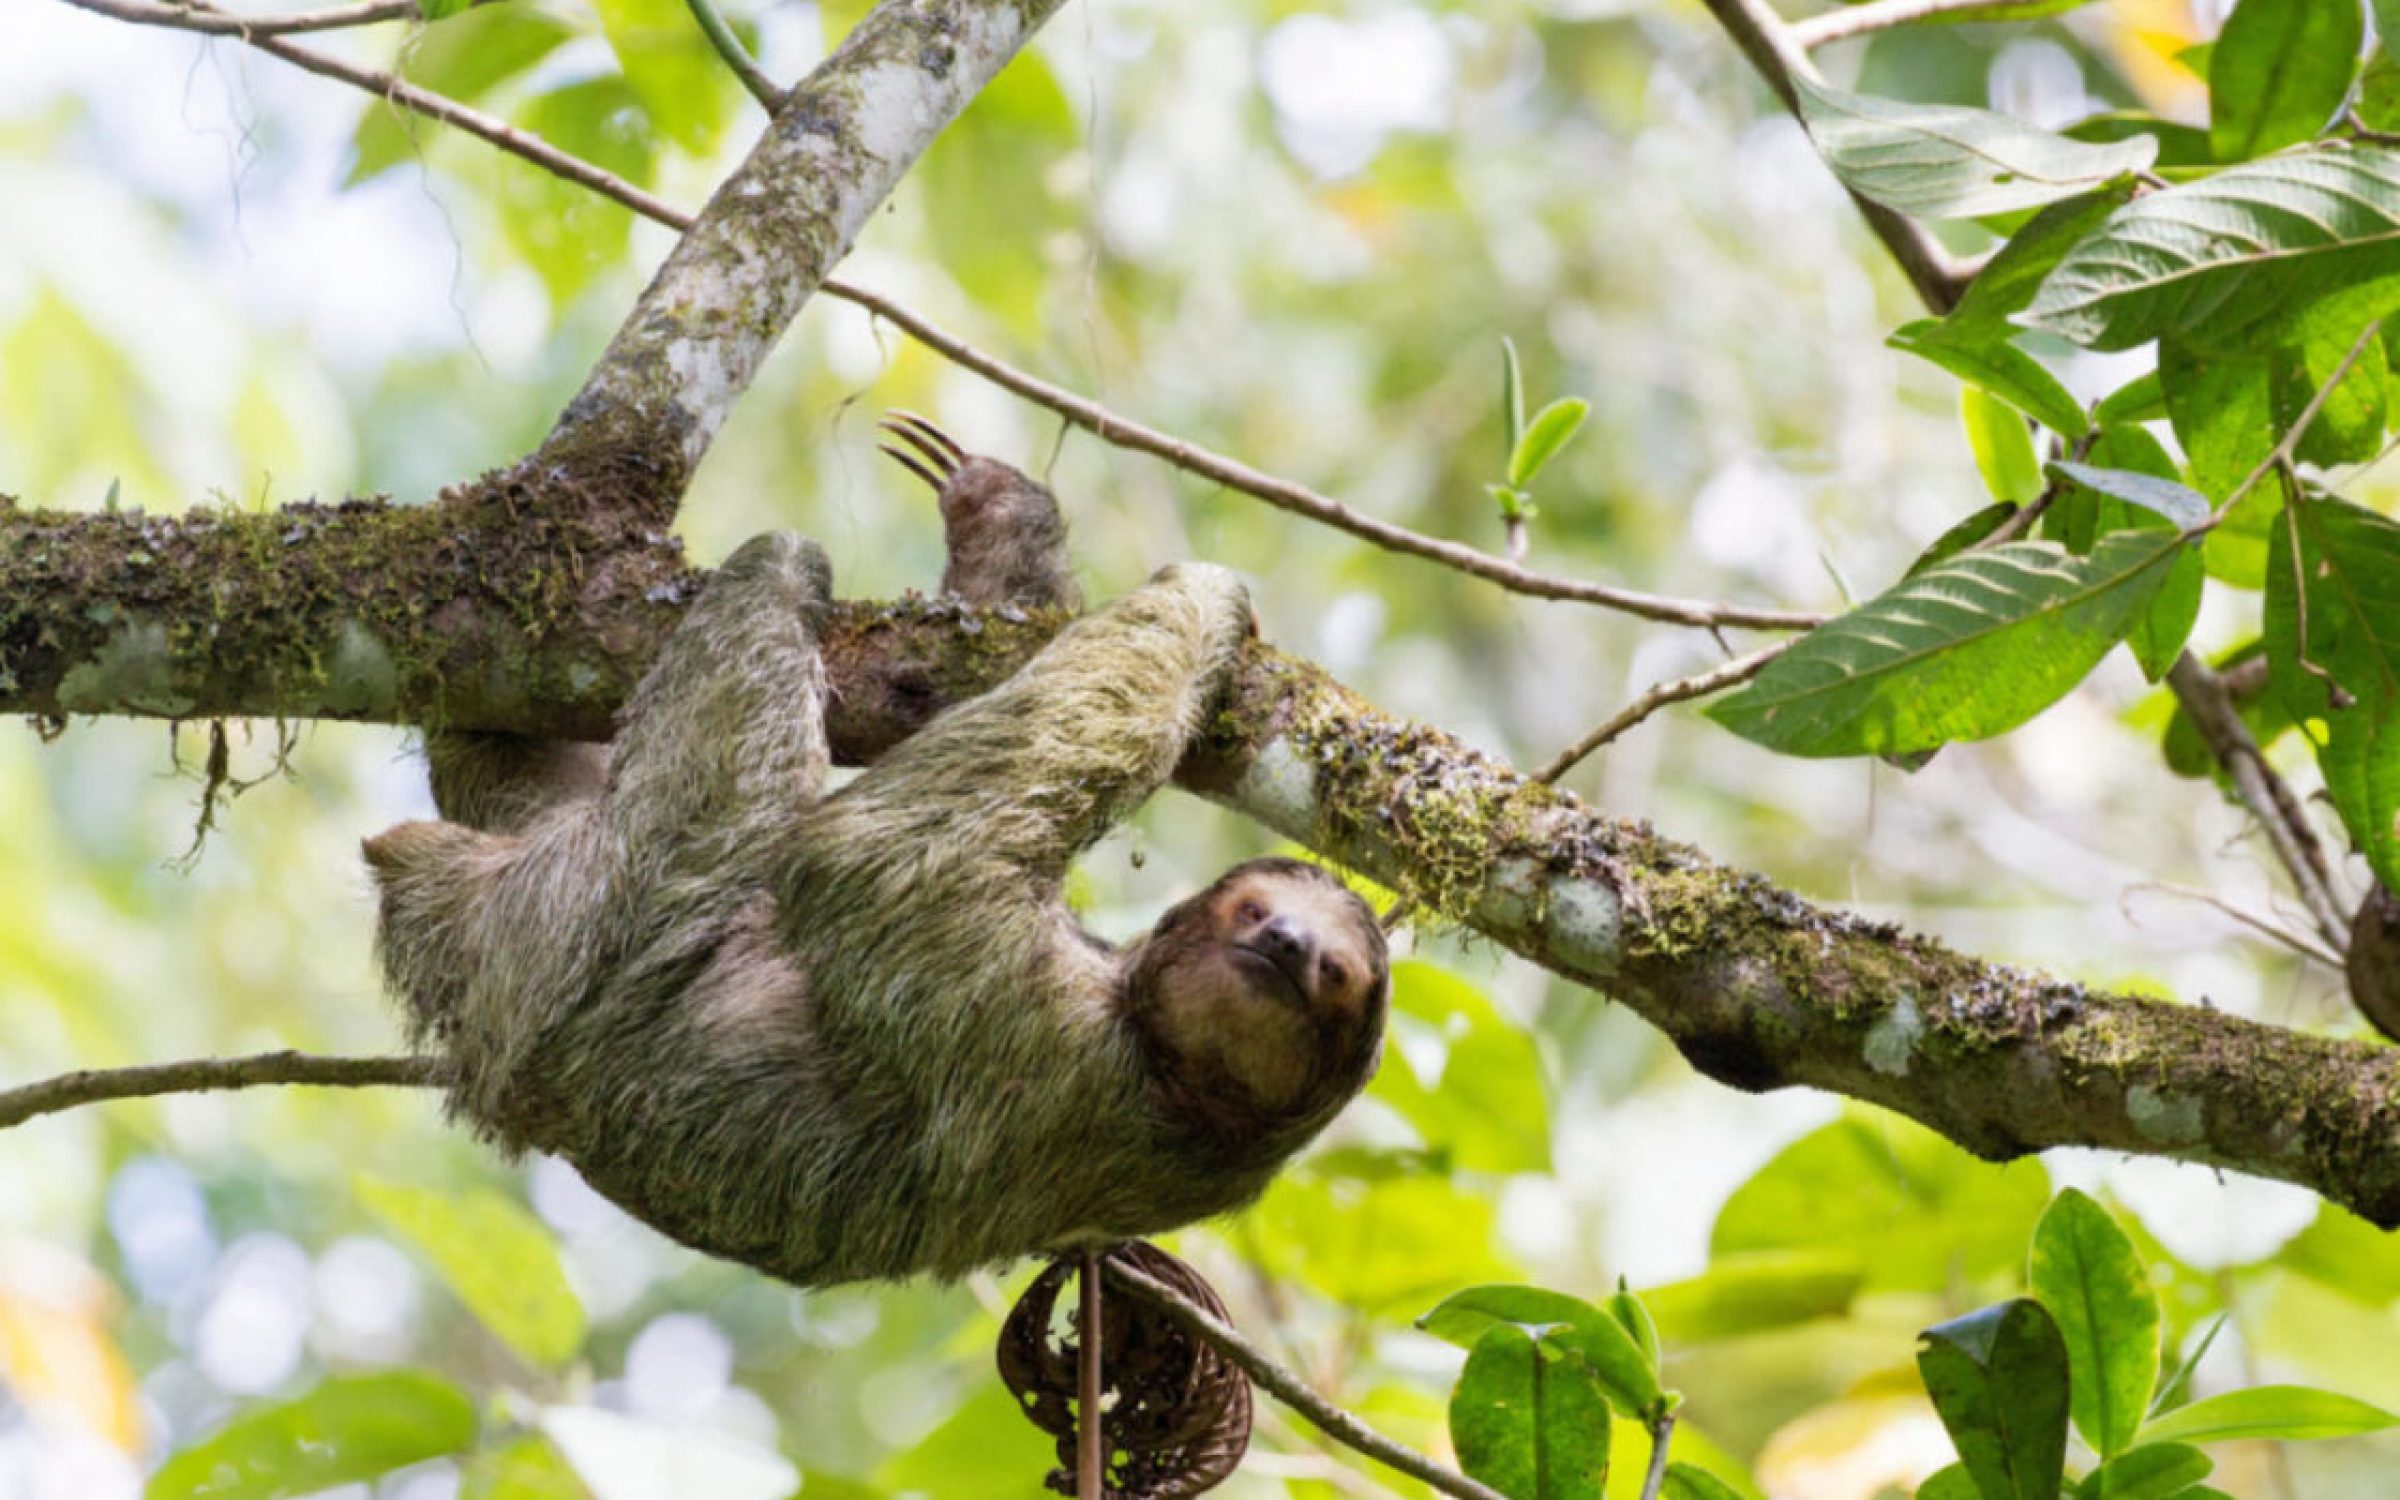 three-toed sloth hanging onto tree branch in rainforest, Costa Rica, central America